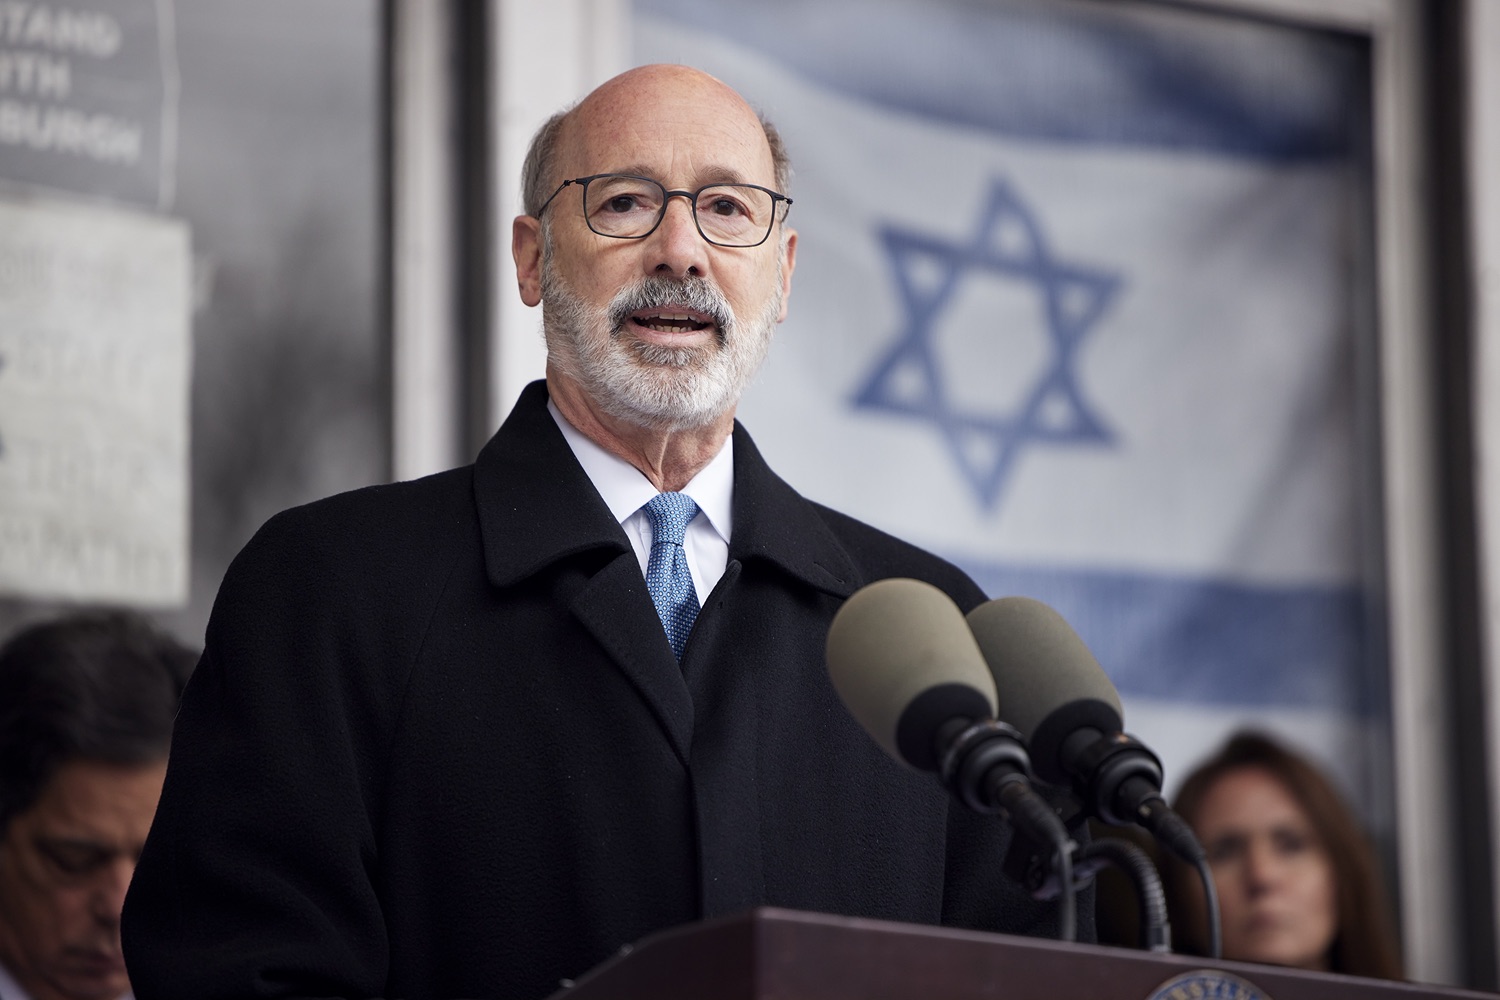 Pennsylvania Governor Tom Wolf speaking with the press.  Governor Tom Wolf visited the Tree of Life in Pittsburgh today to announce $6.6 million in state funding to support the rebuilding and reimagining of the synagogue. The governor was joined by Rabbi Jeffrey Myers, Senate Democratic Leader Jay Costa and members of the Tree of Lifes REMEMBER. REBUILD. RENEW campaign which will transform the site of the worst antisemitic attack in U.S. history into a new place of hope, remembrance, and education. Pittsburgh, PA - December 6, 2021<br><a href="https://filesource.amperwave.net/commonwealthofpa/photo/20308_gov_treeOfLife_dz_004_copy.jpg" target="_blank">⇣ Download Photo</a>